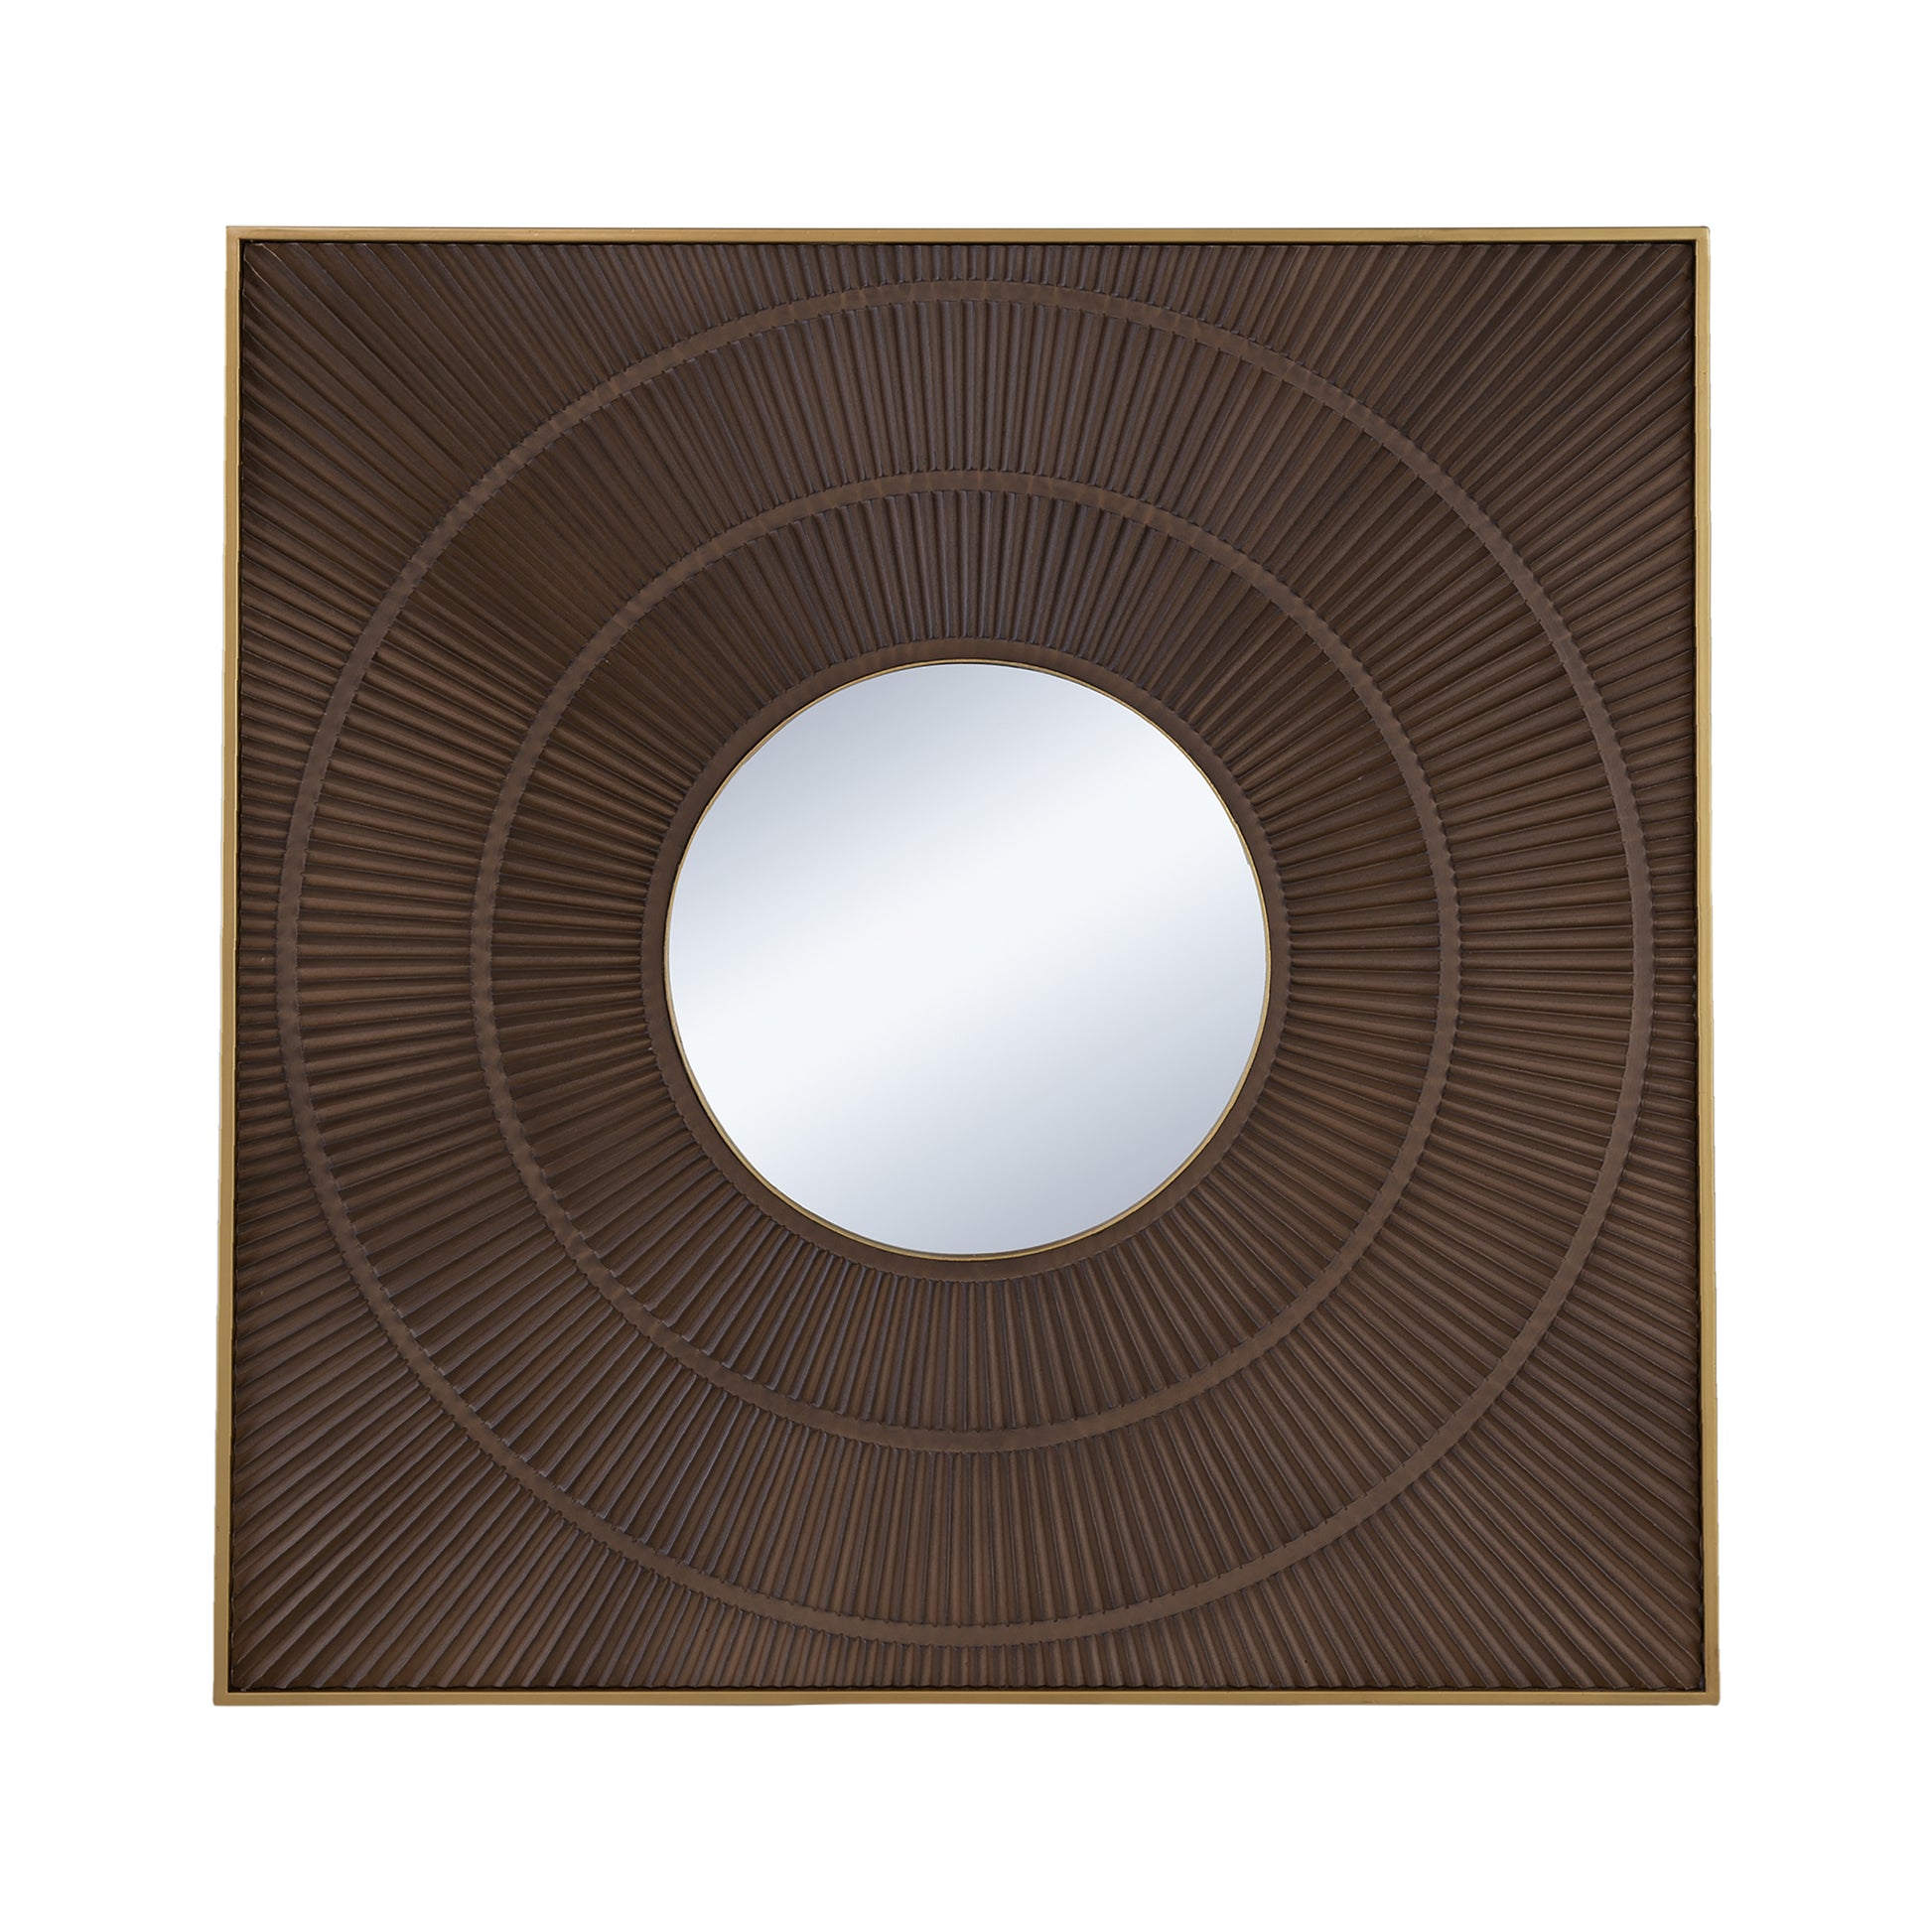 40" x 40" Square Carved Mirror with Pleated Design brown-mdf+glass